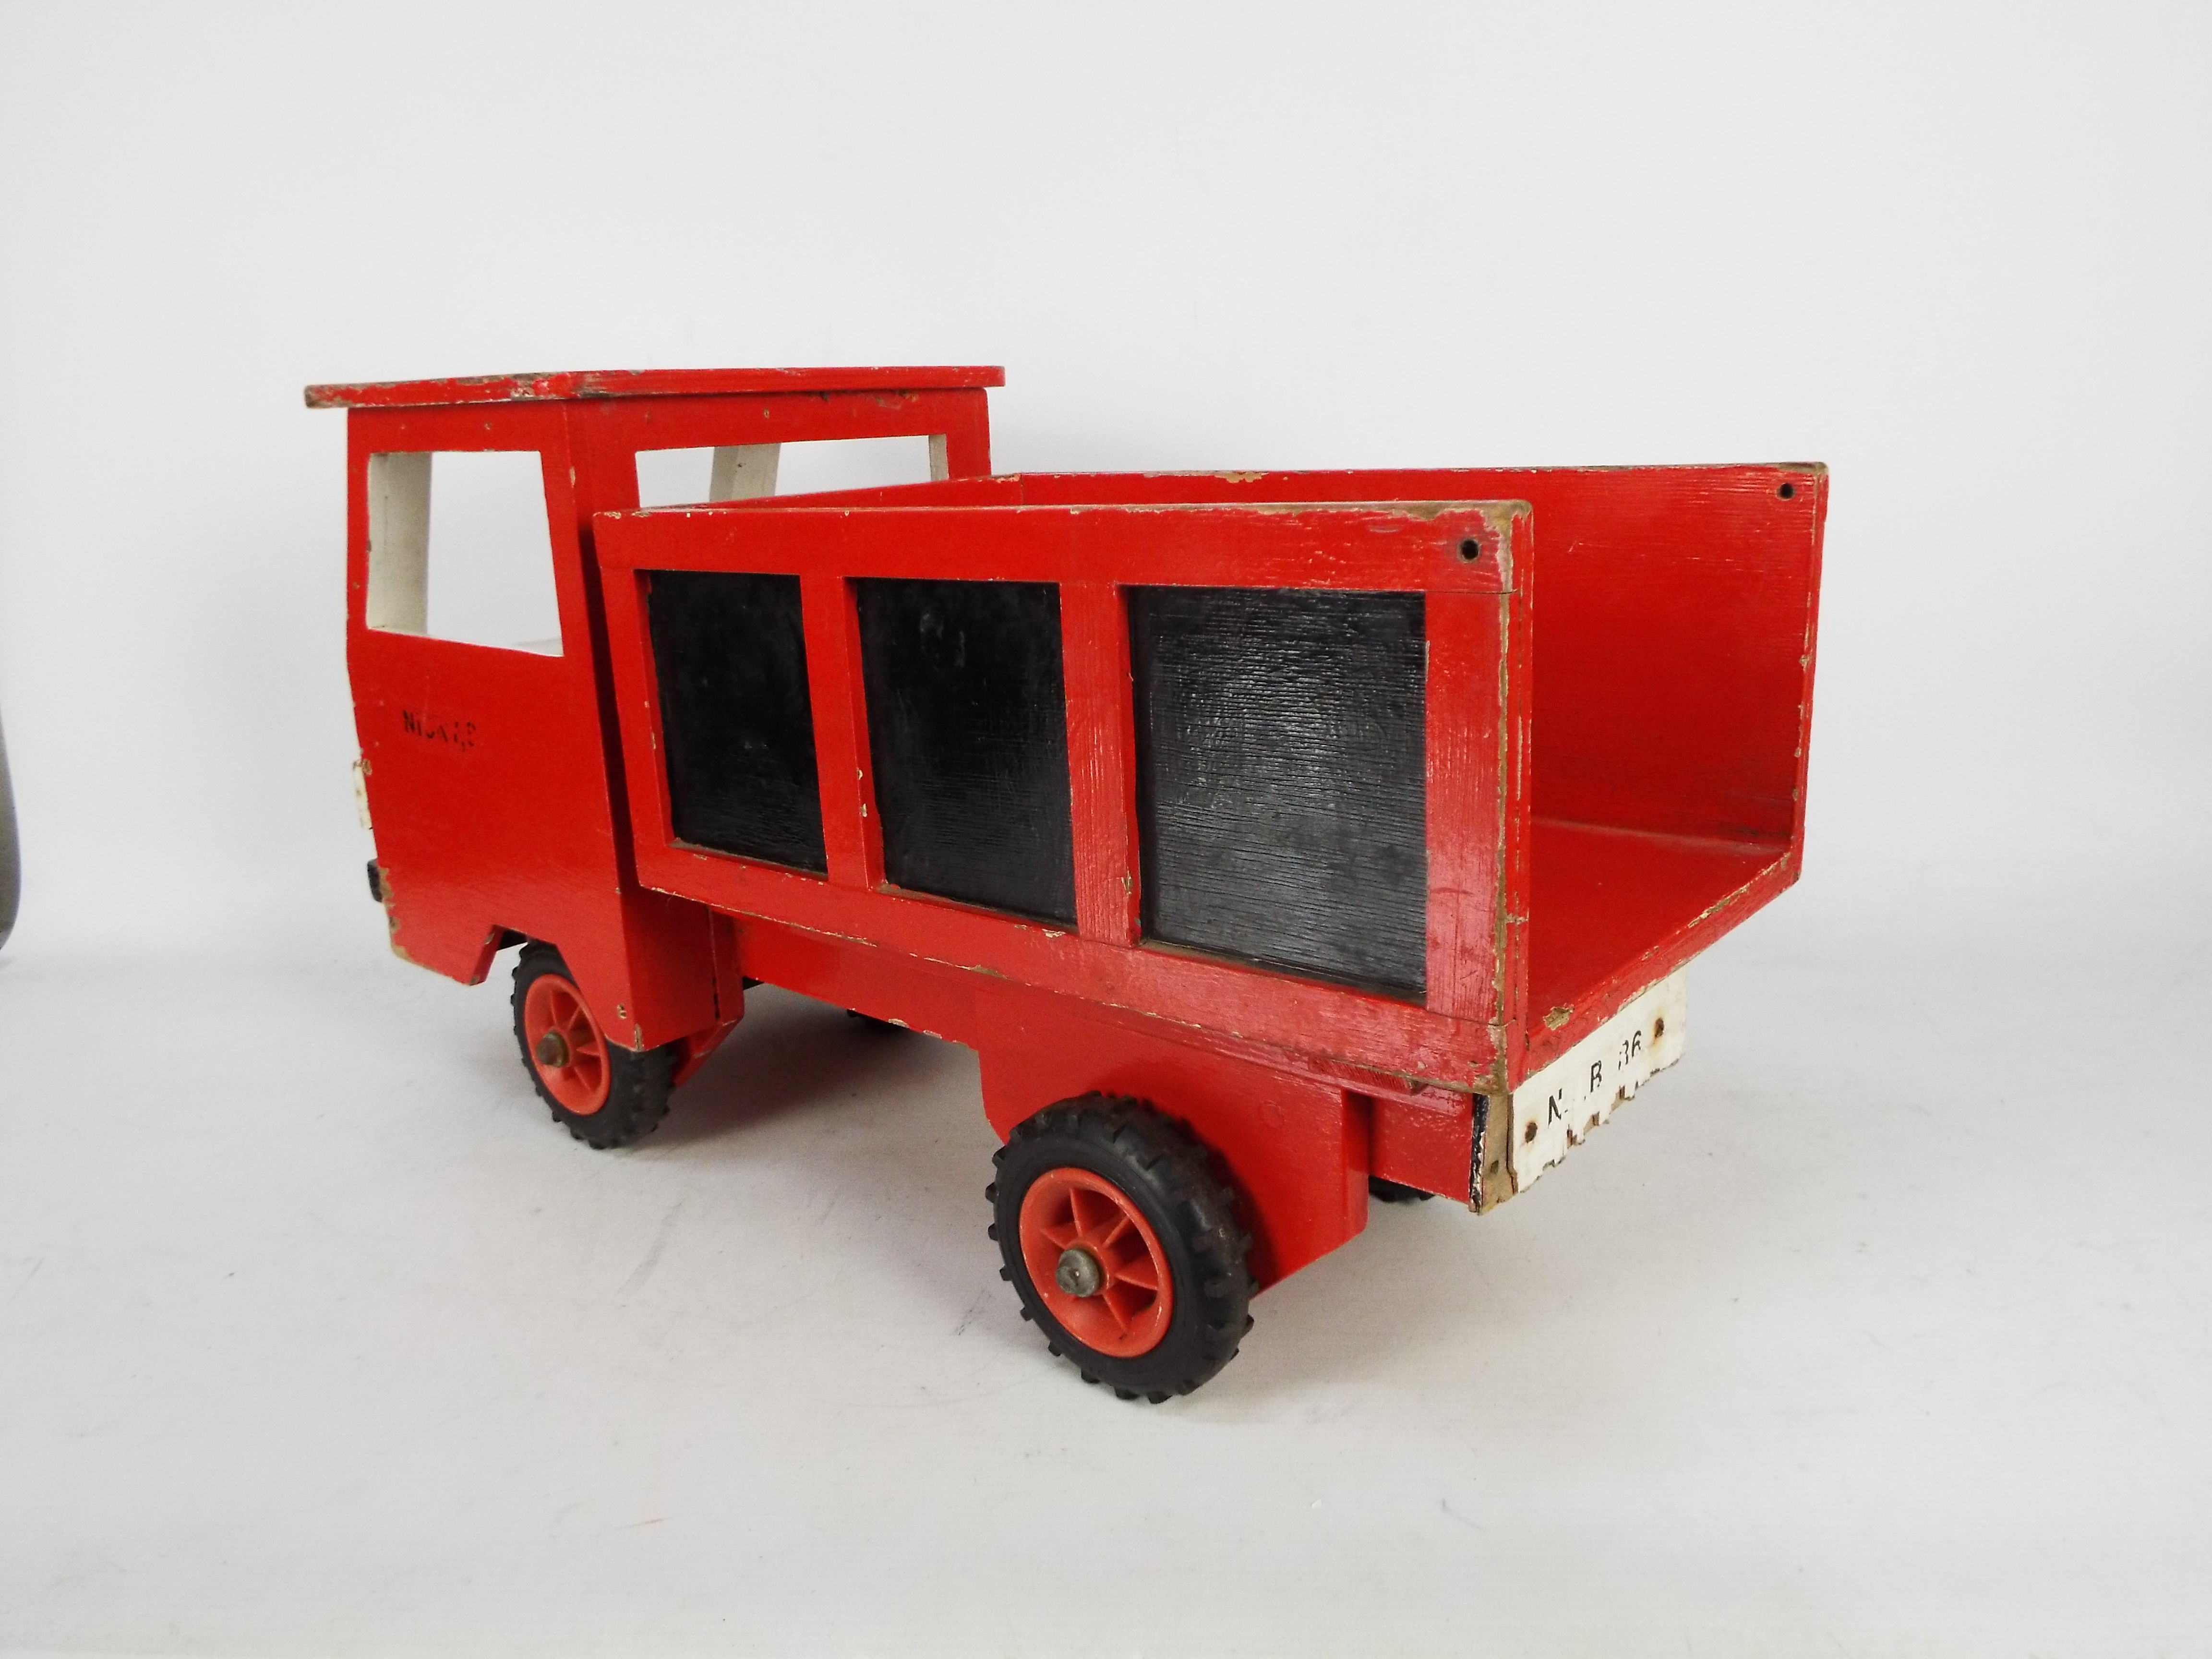 A vintage hand-made wooden tipper truck painted red with black panels and white driver's cab, - Image 5 of 5